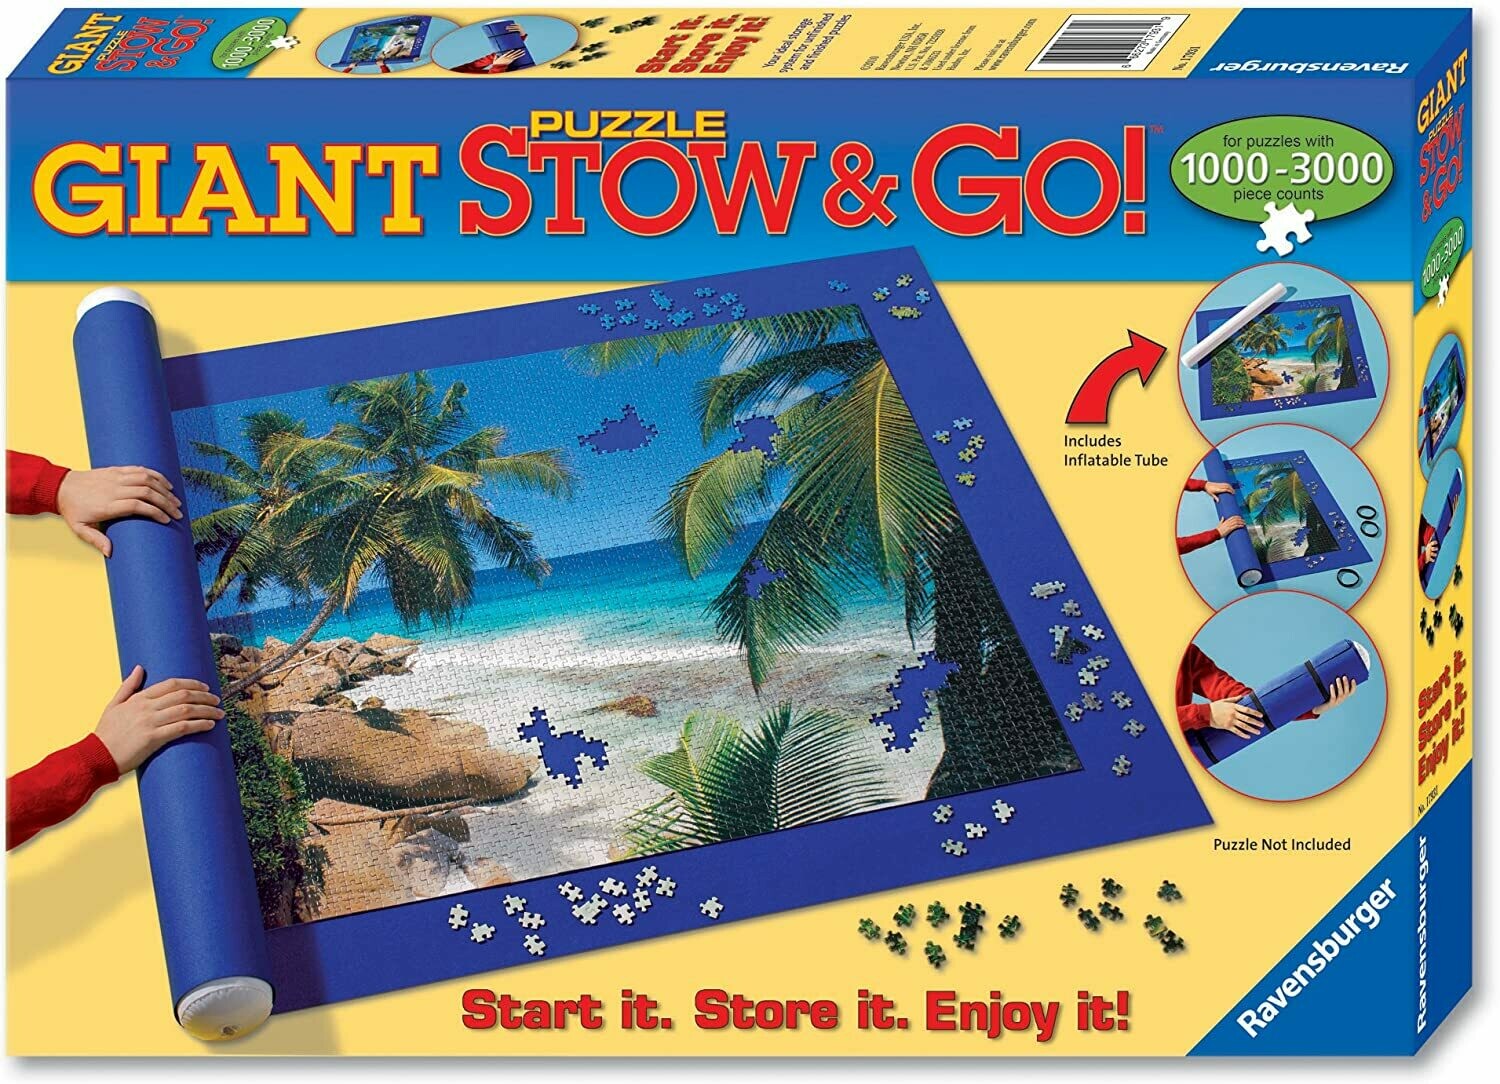 Giant Stow and Go